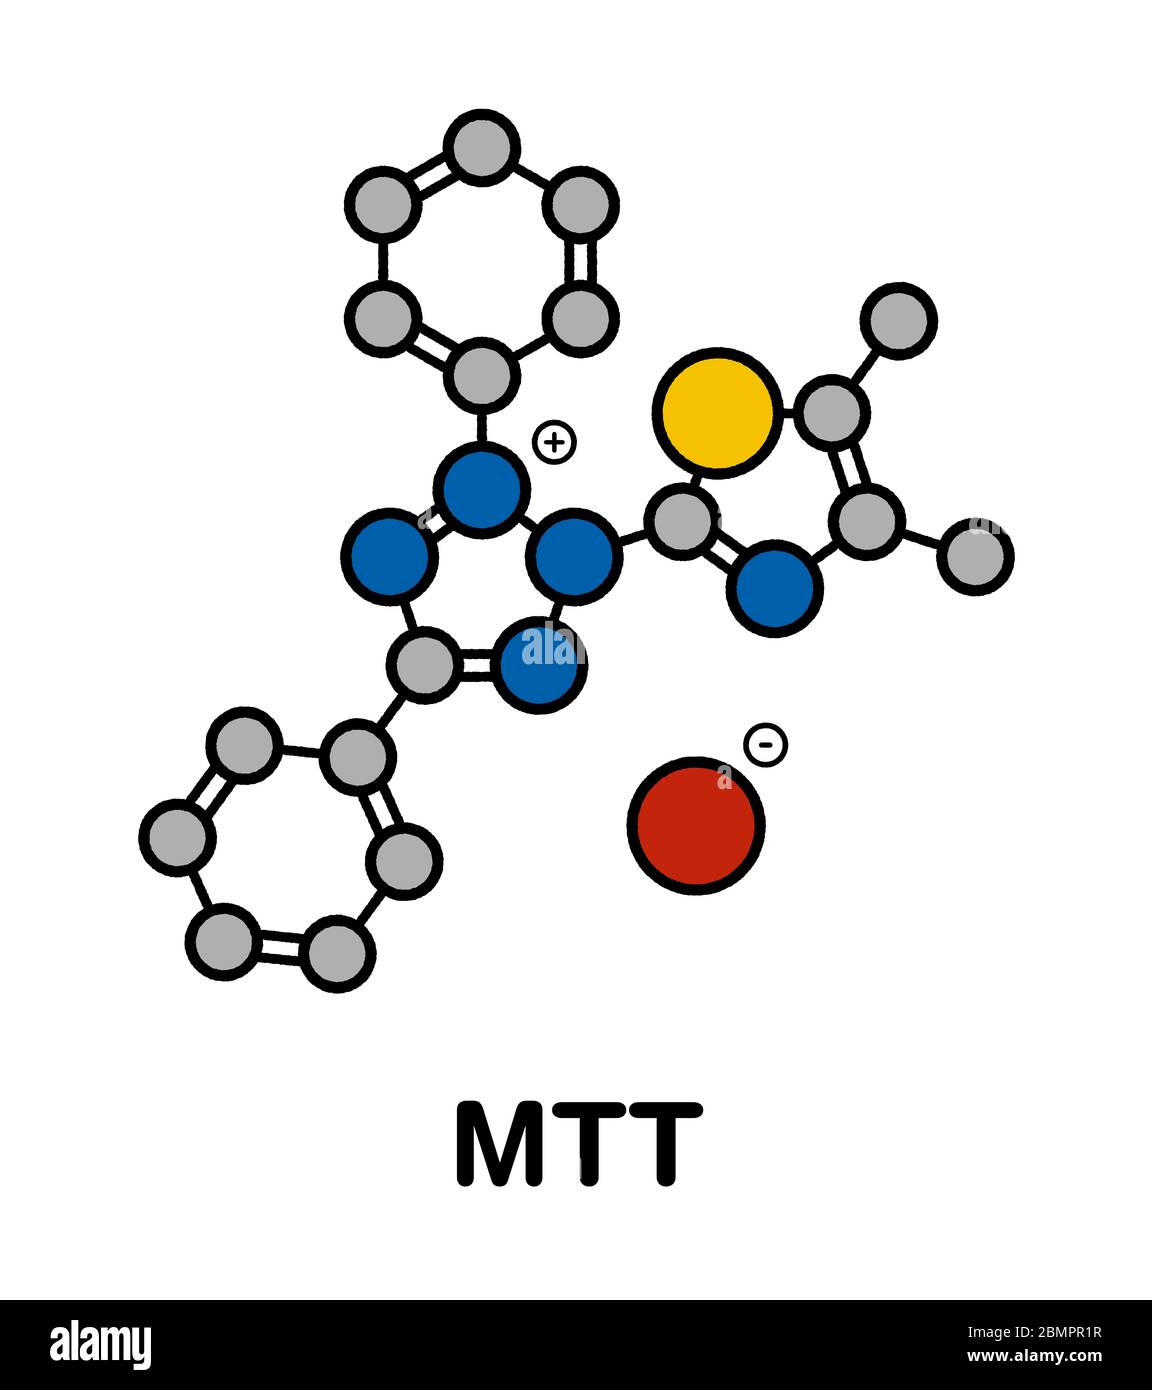 MTT yellow tetrazole dye molecule. Used in MTT assay, used to measure cytotoxicity and cell metabolic activity. Stylized skeletal formula (chemical structure): Atoms are shown as color-coded circles: hydrogen (hidden), carbon (grey), oxygen (red), nitrogen (blue), sulfur (yellow), bromine (brown). Stock Photo